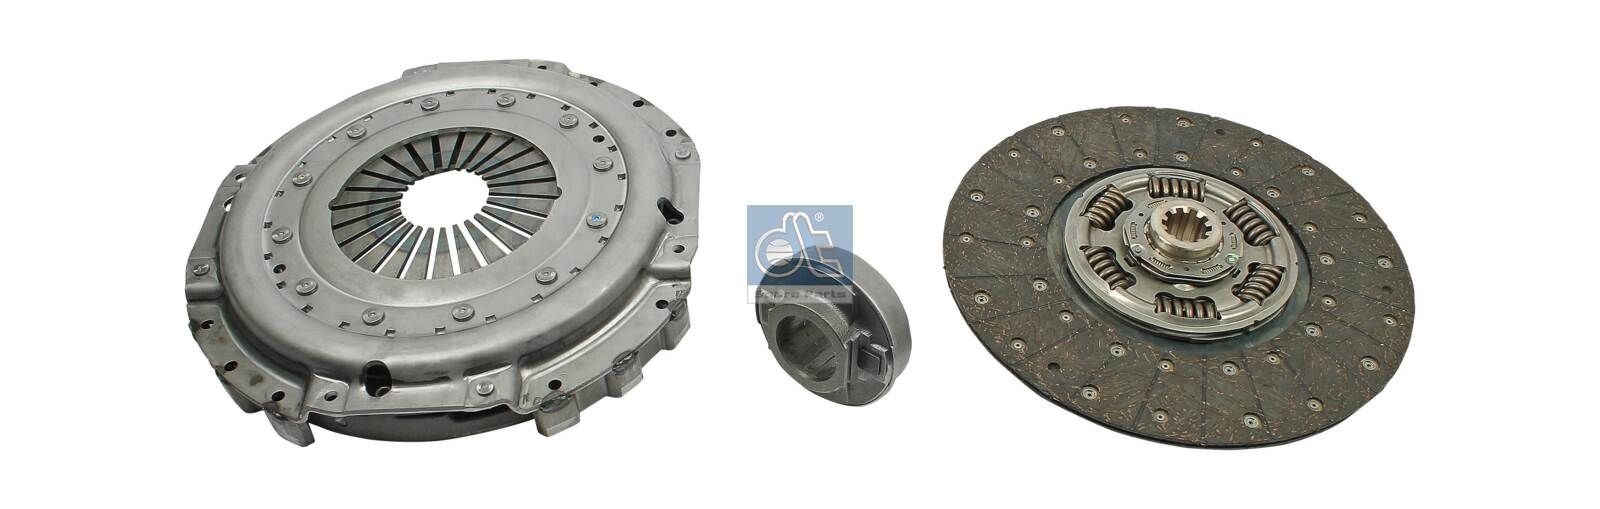 827187 DT Spare Parts 430mm Ø: 430mm Clutch replacement kit 6.93040 buy